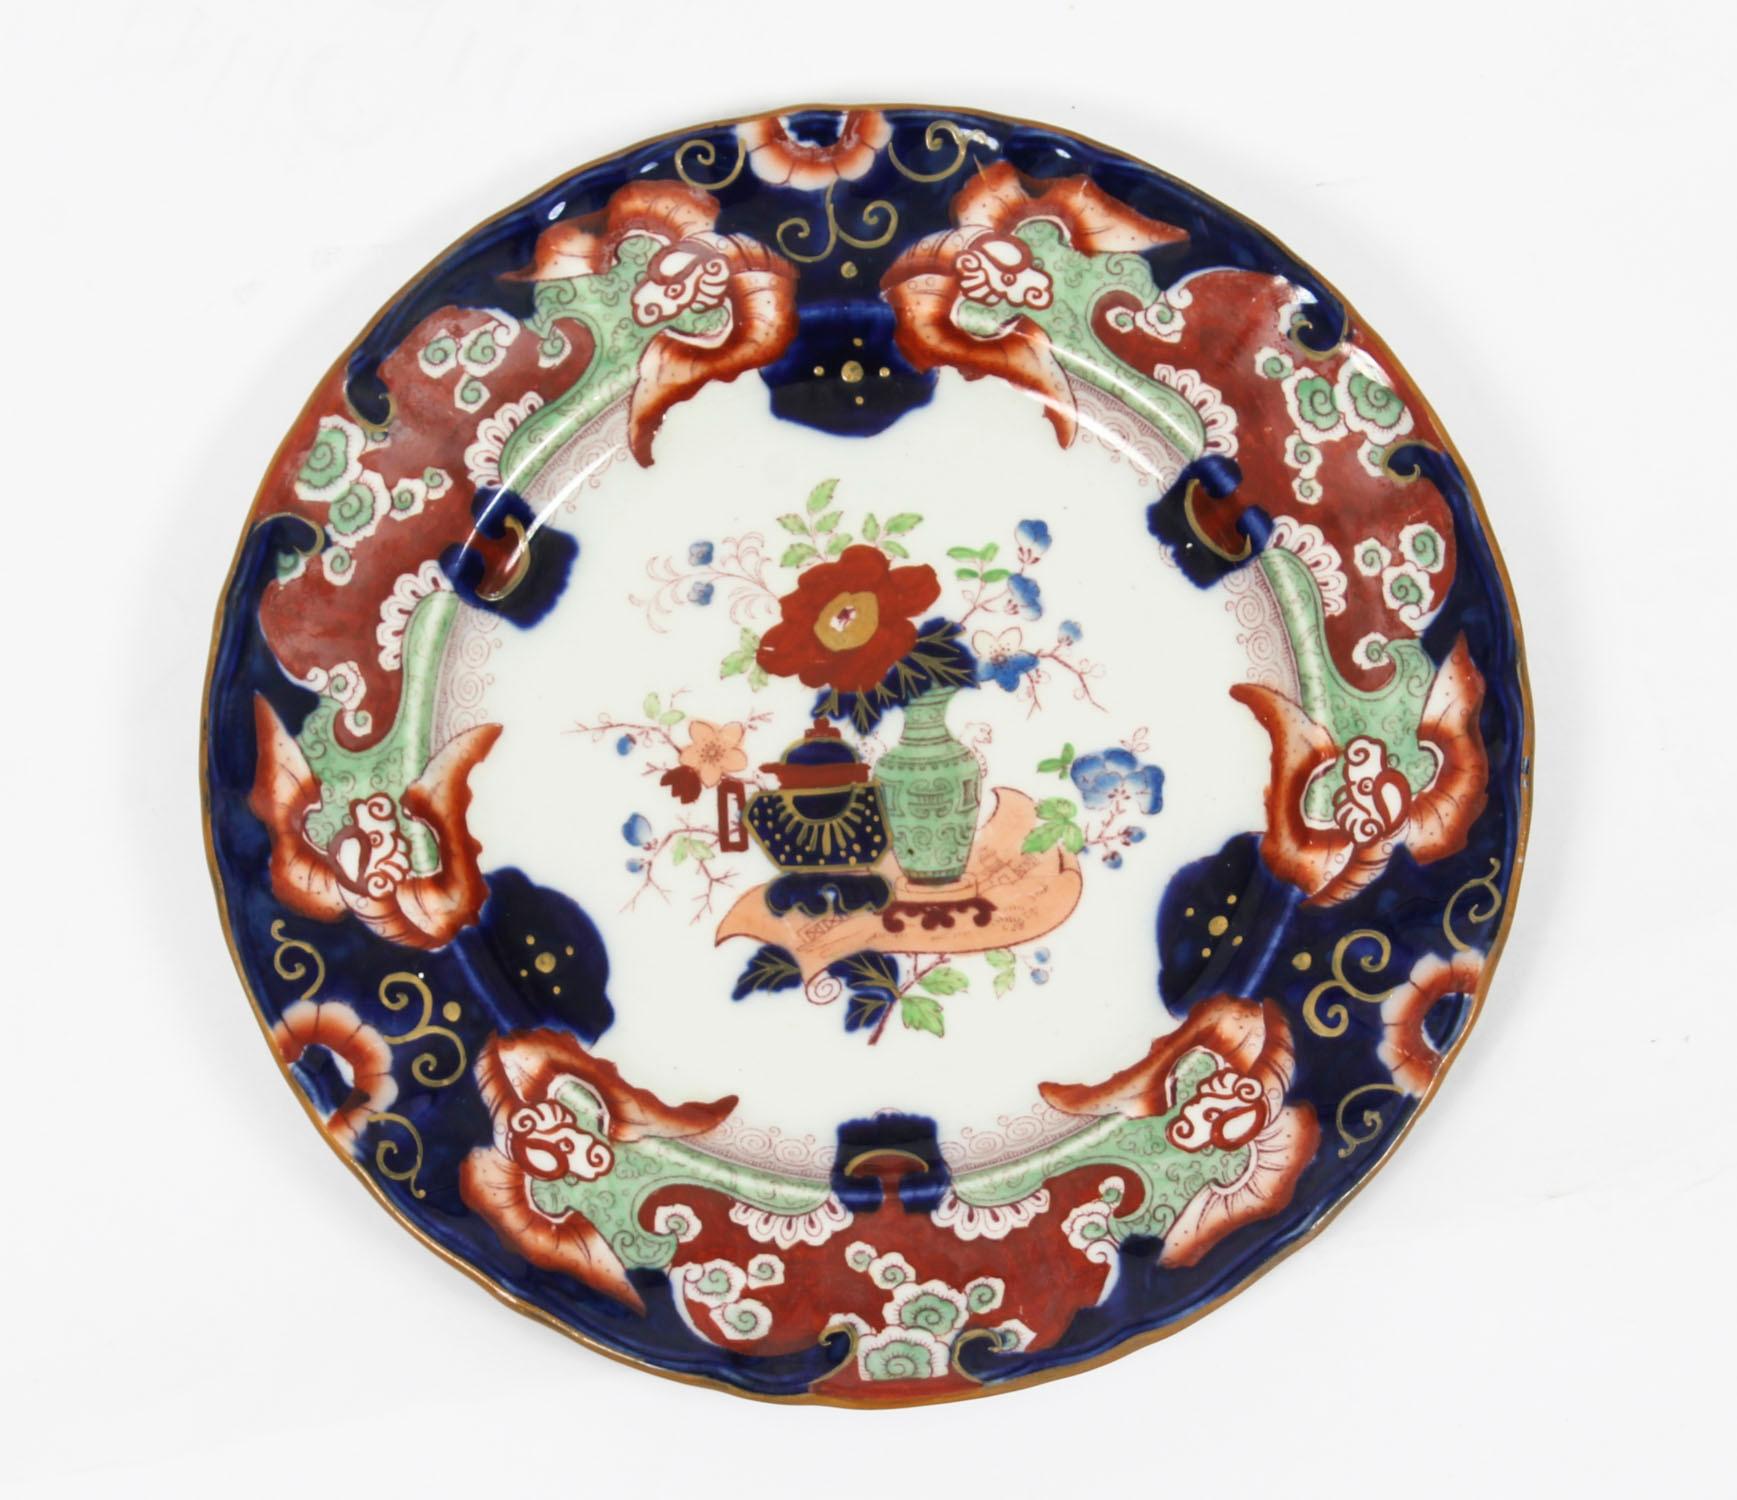 A lovely extensive Mason's Patent Ironstone China dinner service, with puce printed factory marks and the retailer's mark for Alfred B. Pearce & Co., 39 Ludgate Hill, London, Circa 1830 in date.

The set is heavily decorated in an Imari style